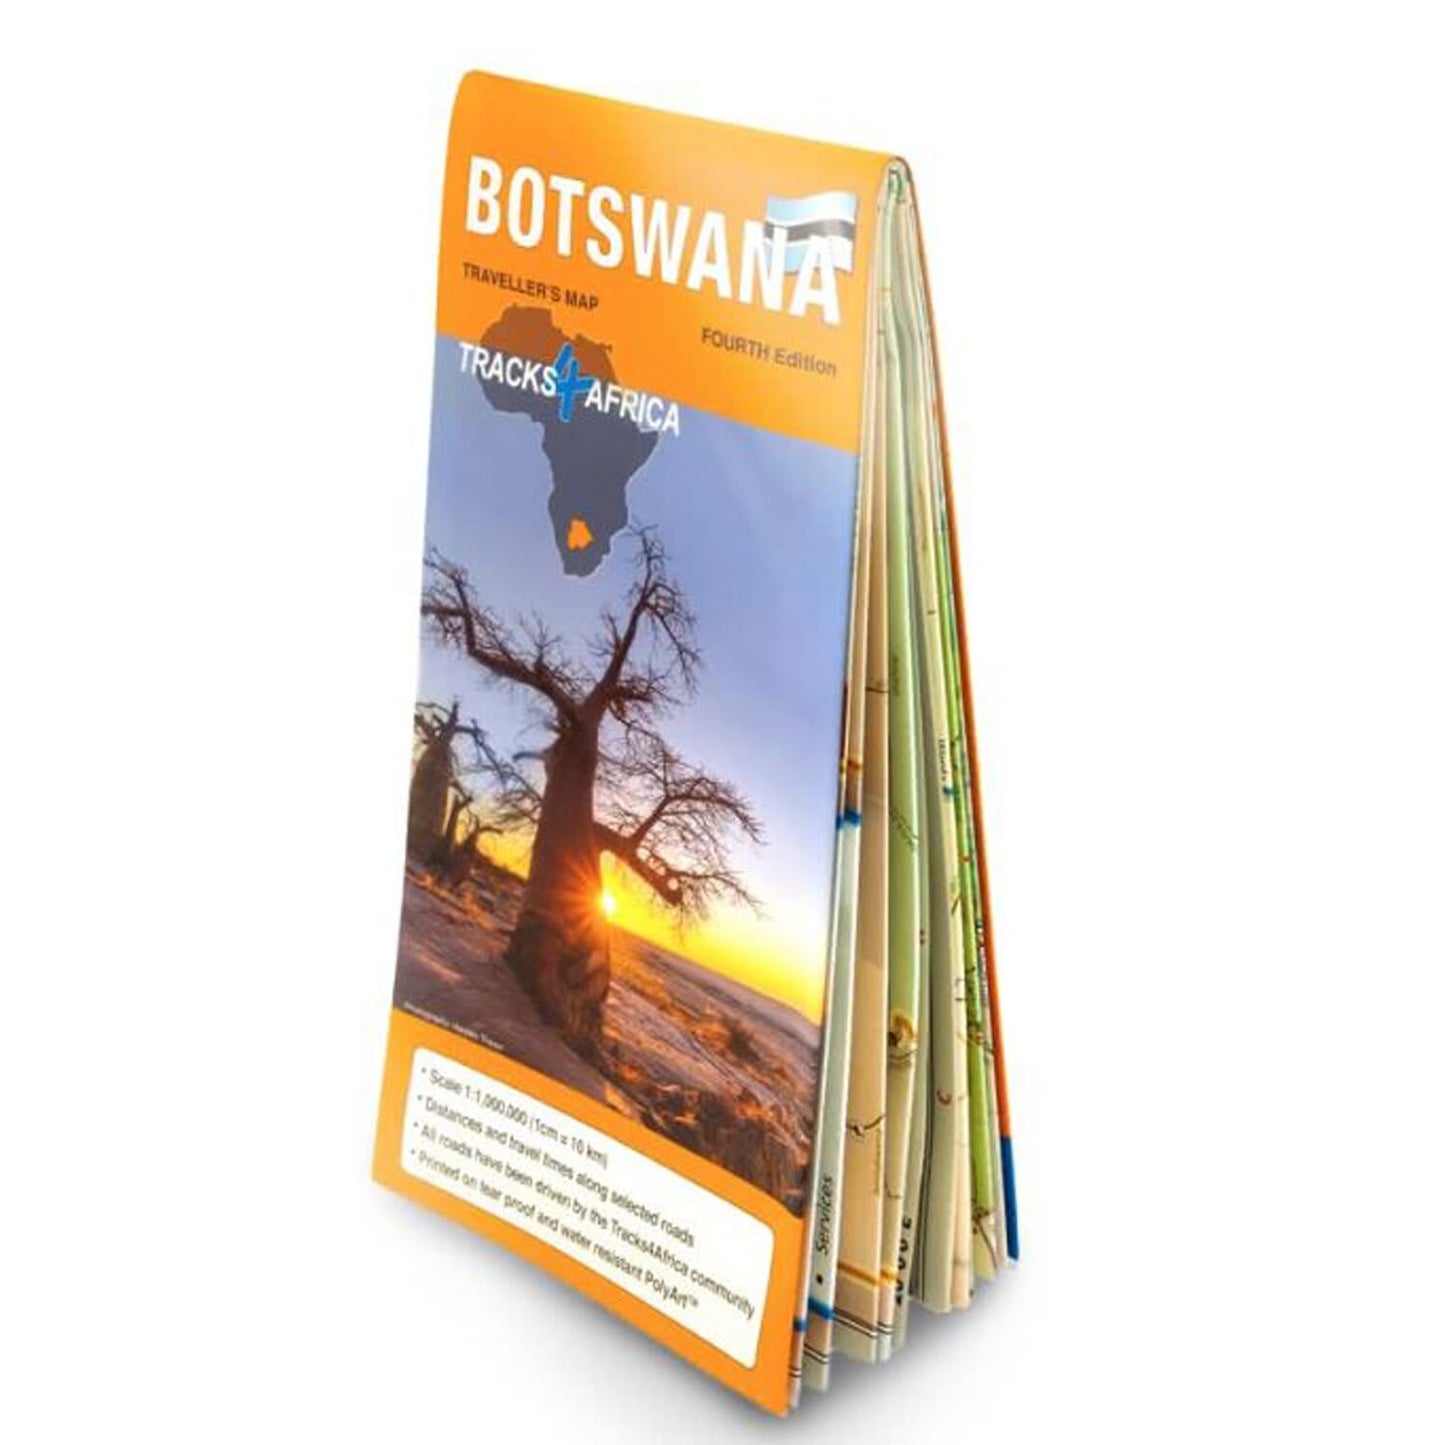 Botswana Traveller’s Paper Map 4th Edition